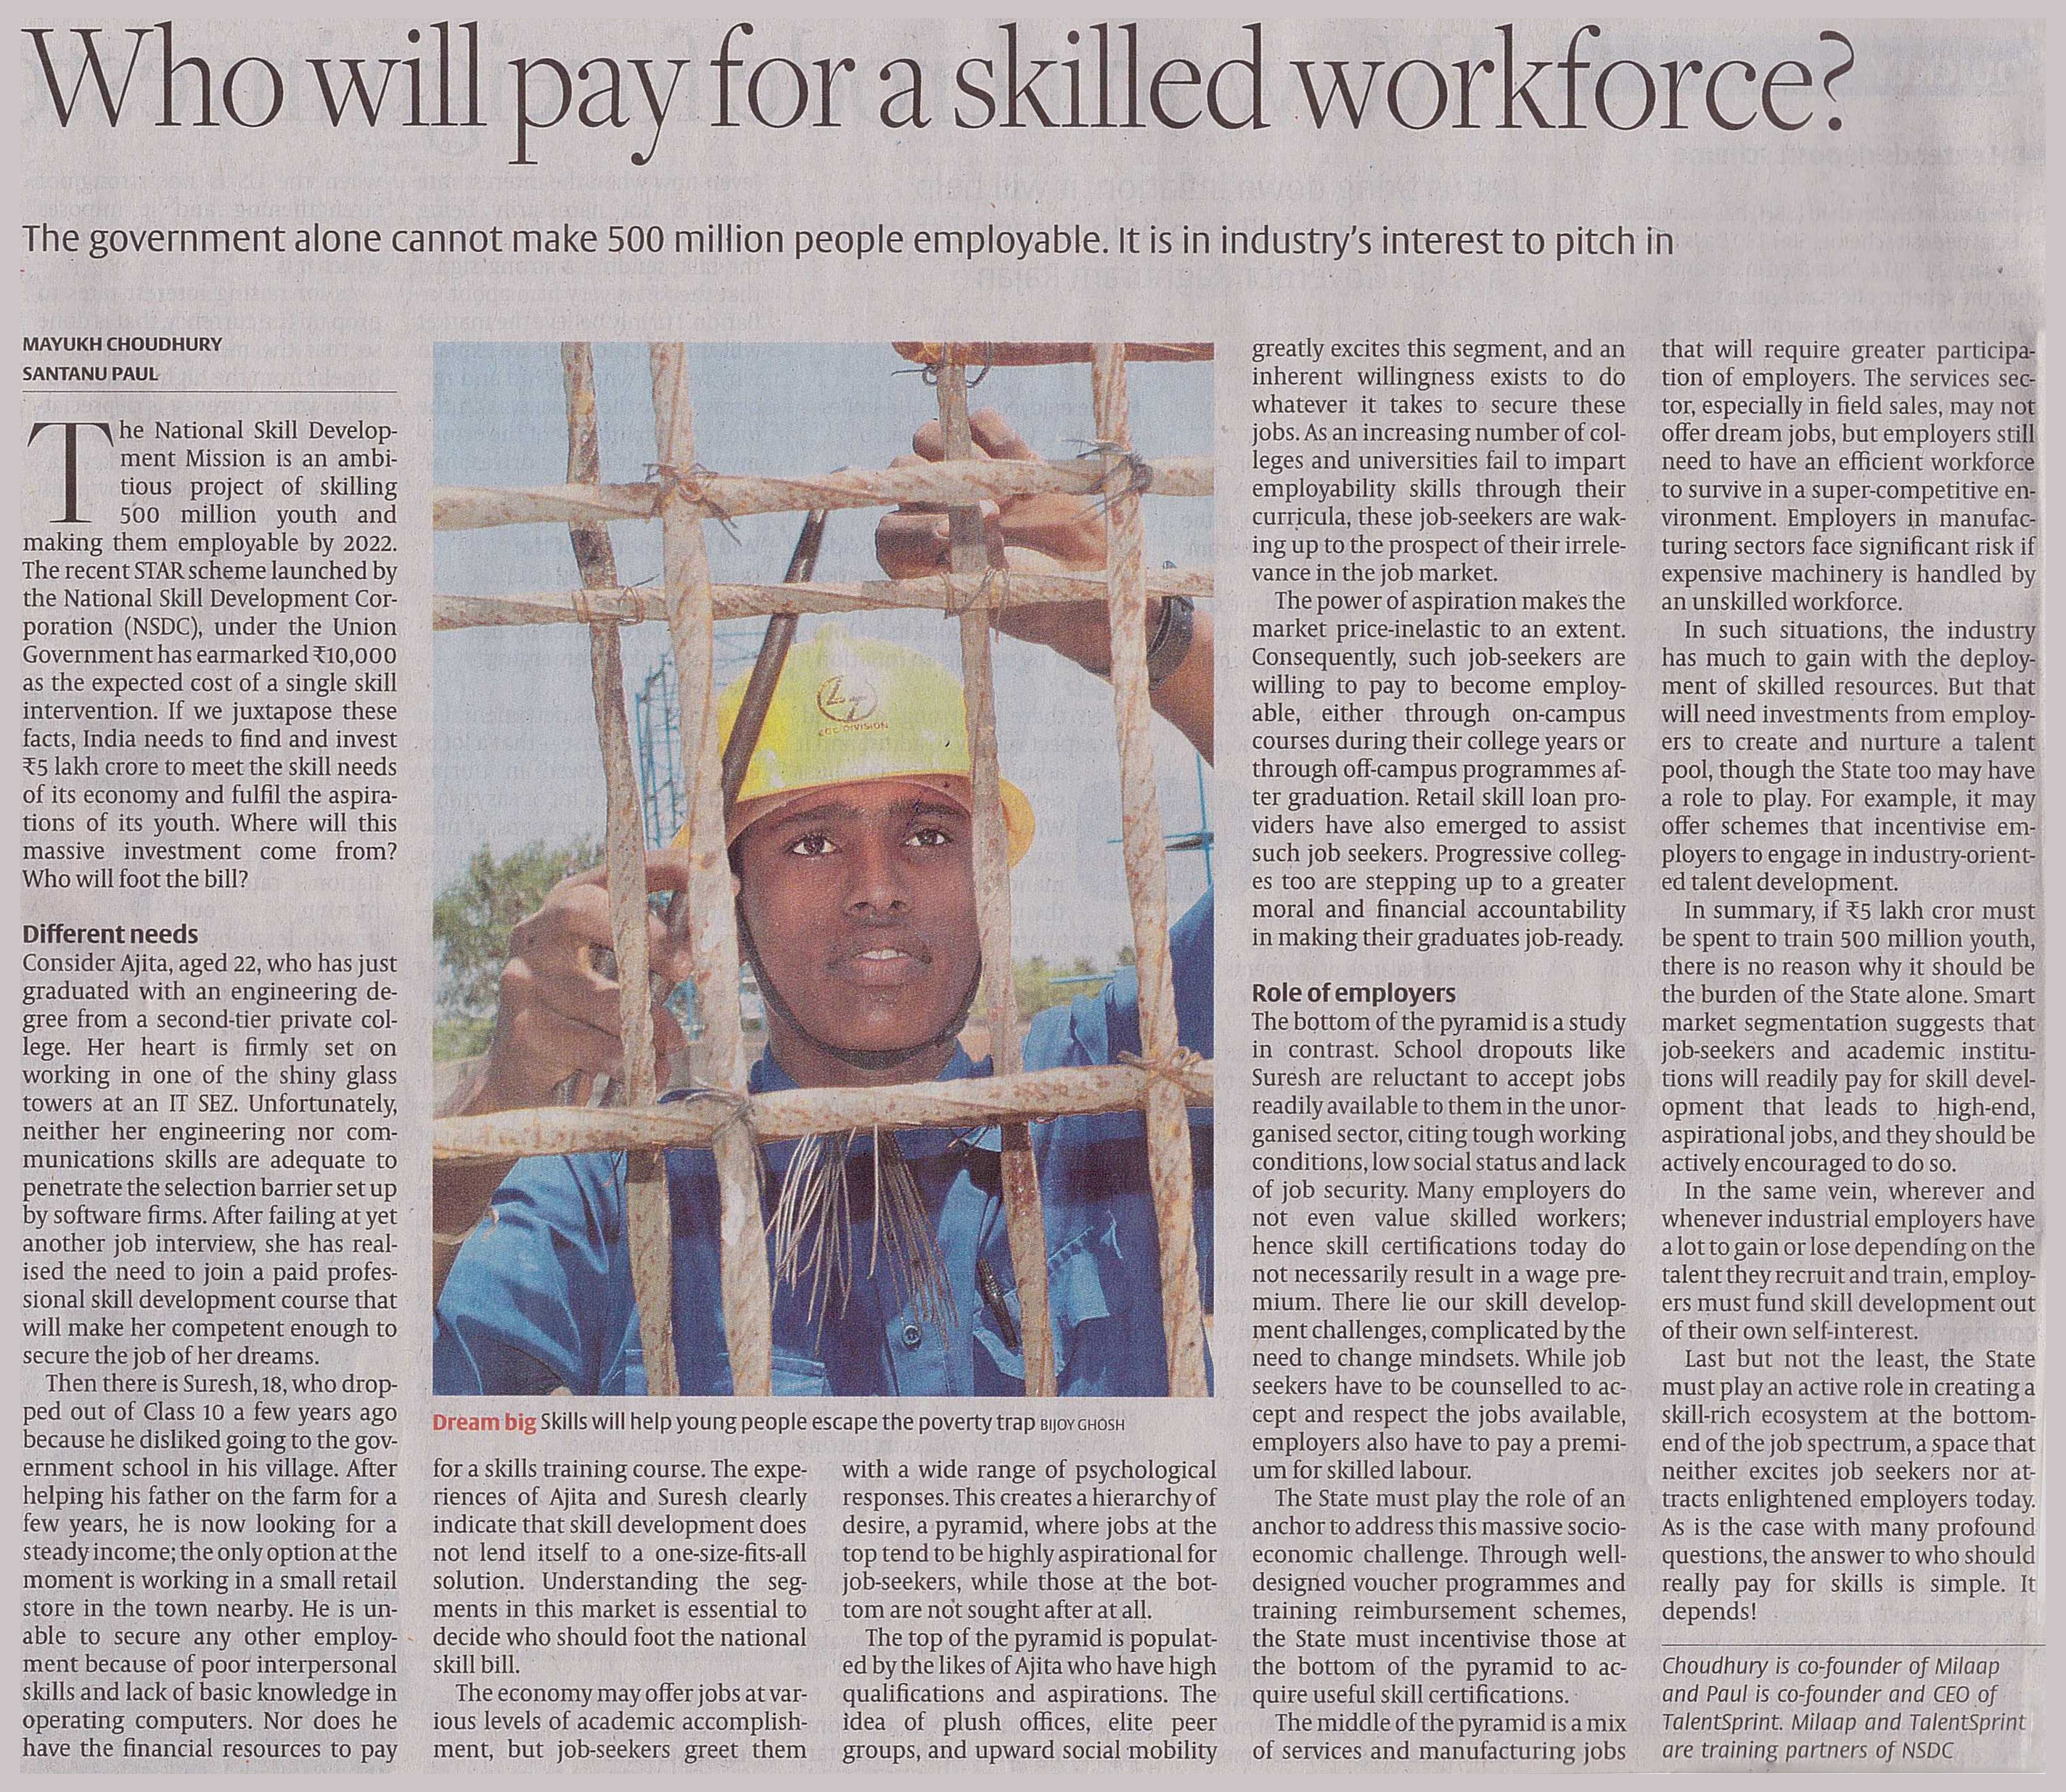 Who will pay for a skilled workforce?